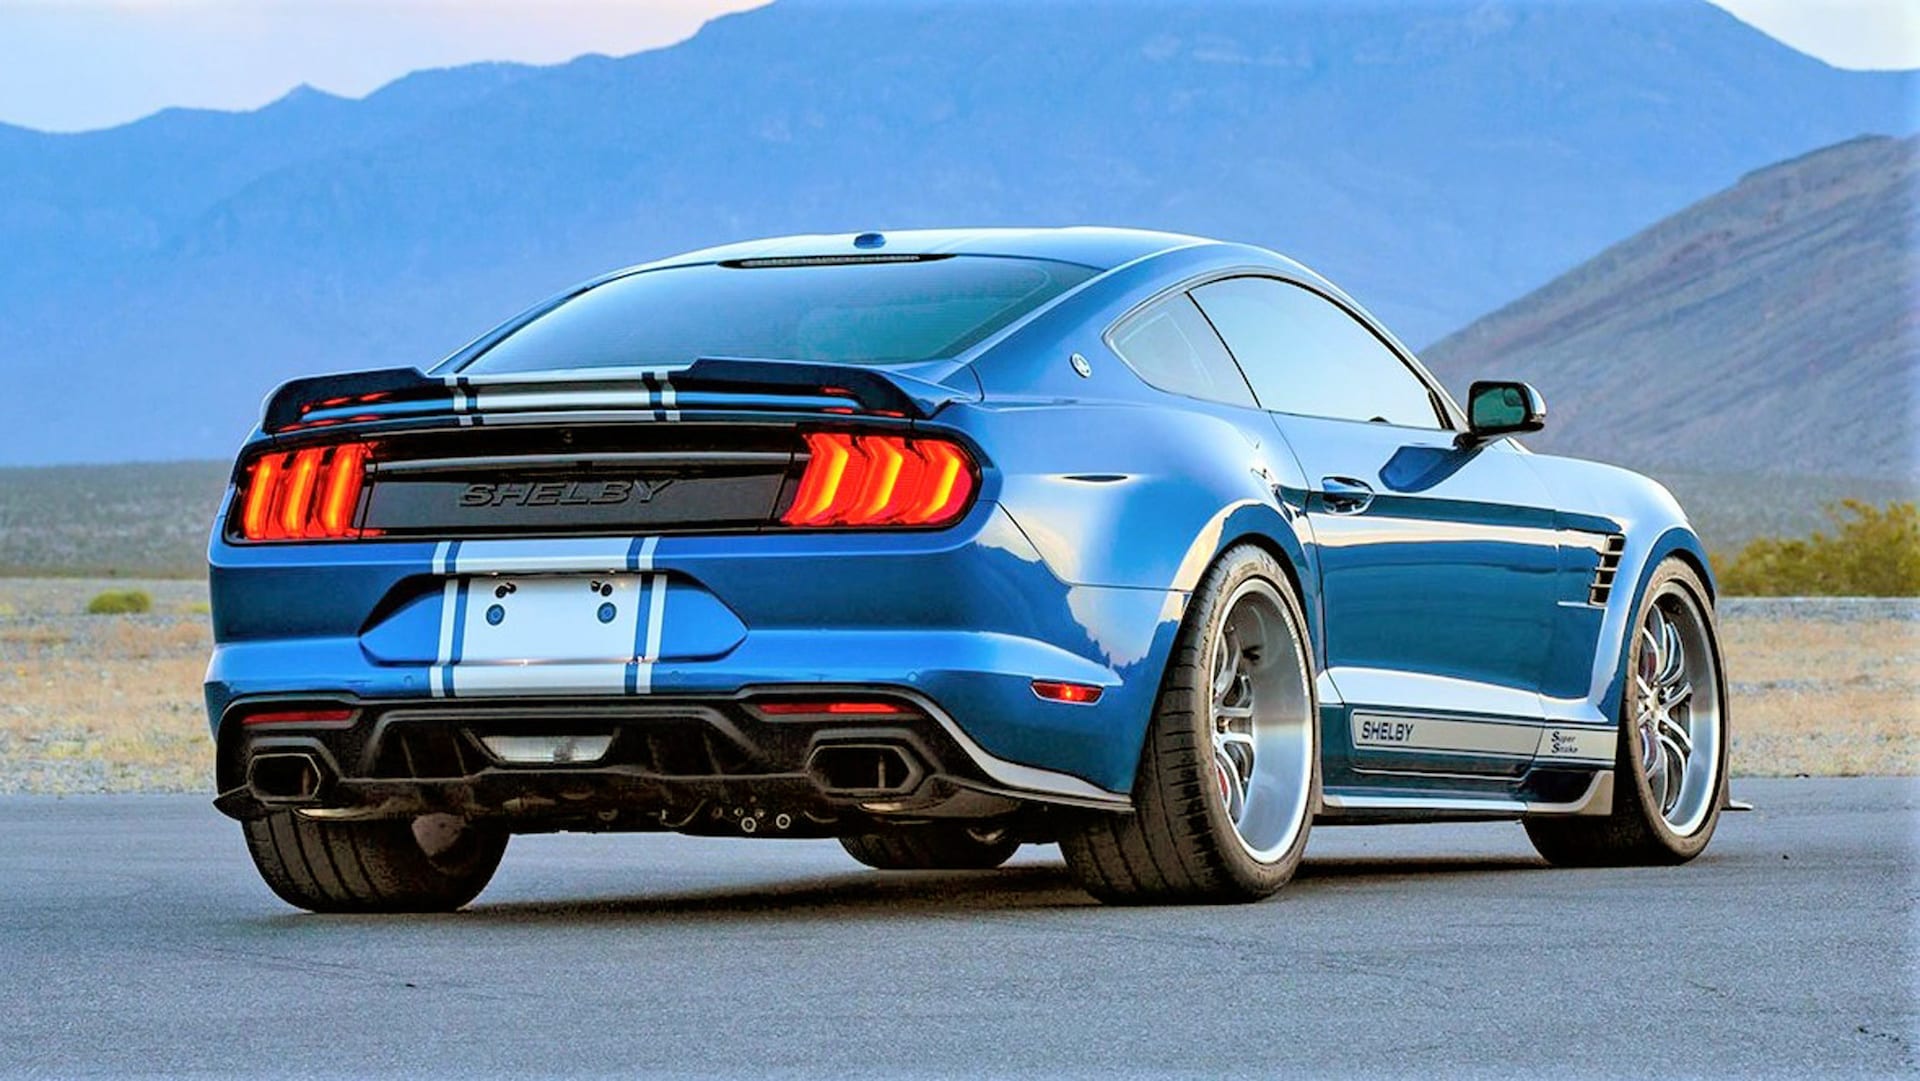 013 shelby american mustang s550 widebody conversion